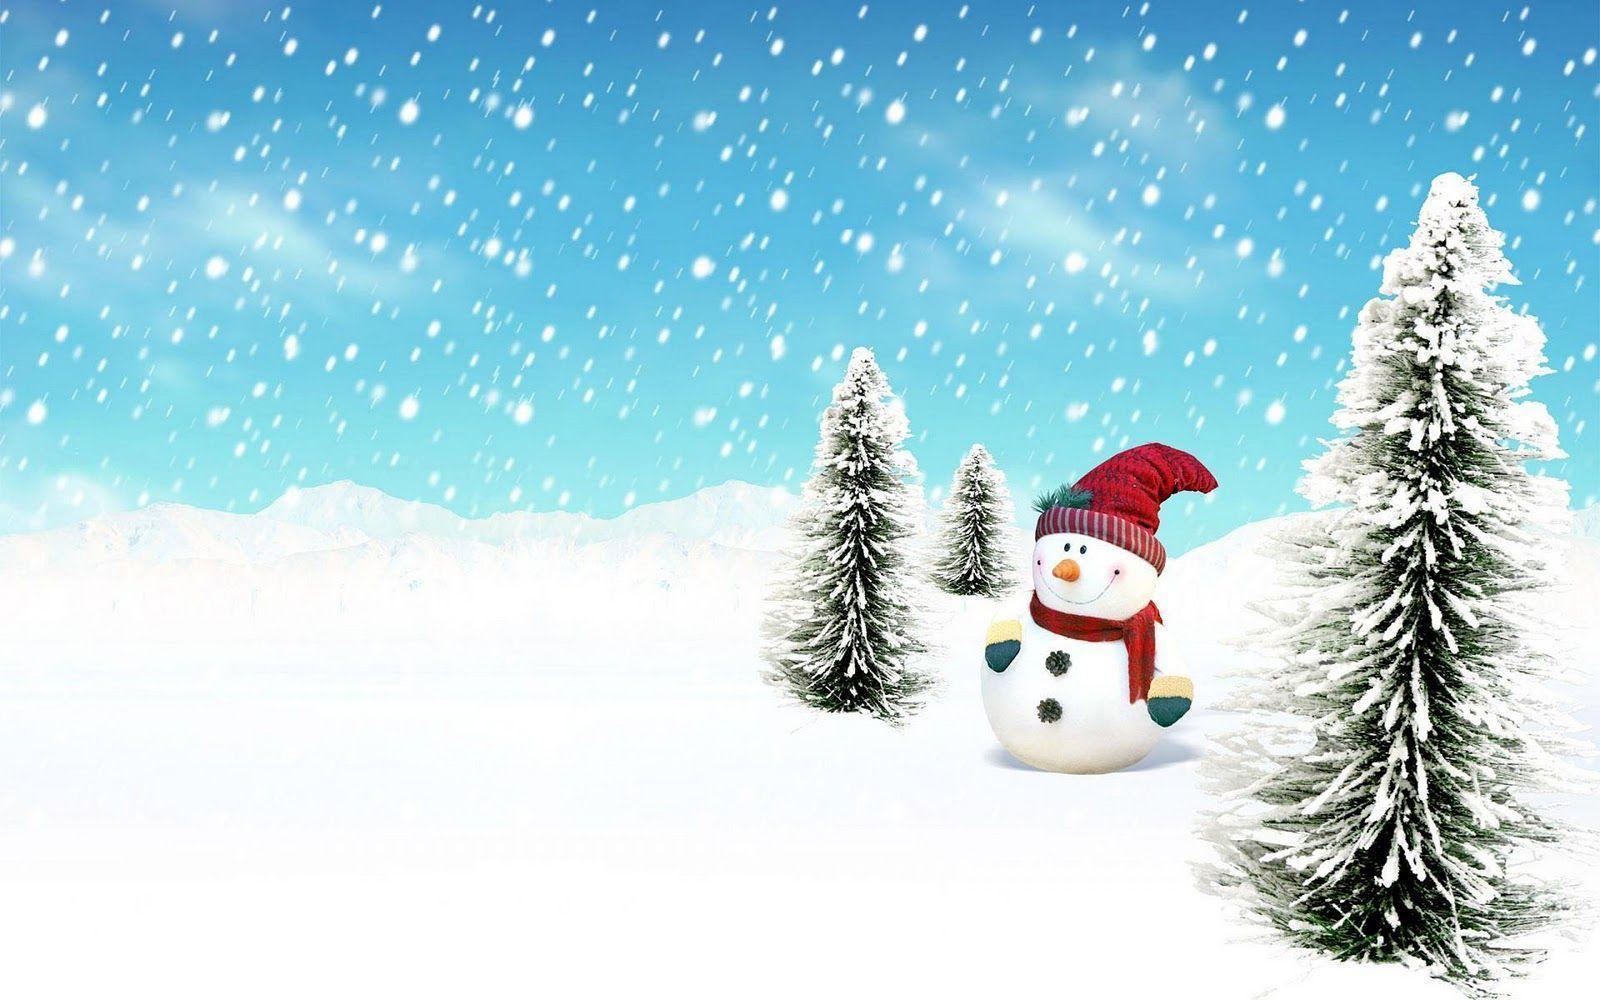 Snowman Phone Wallpapers